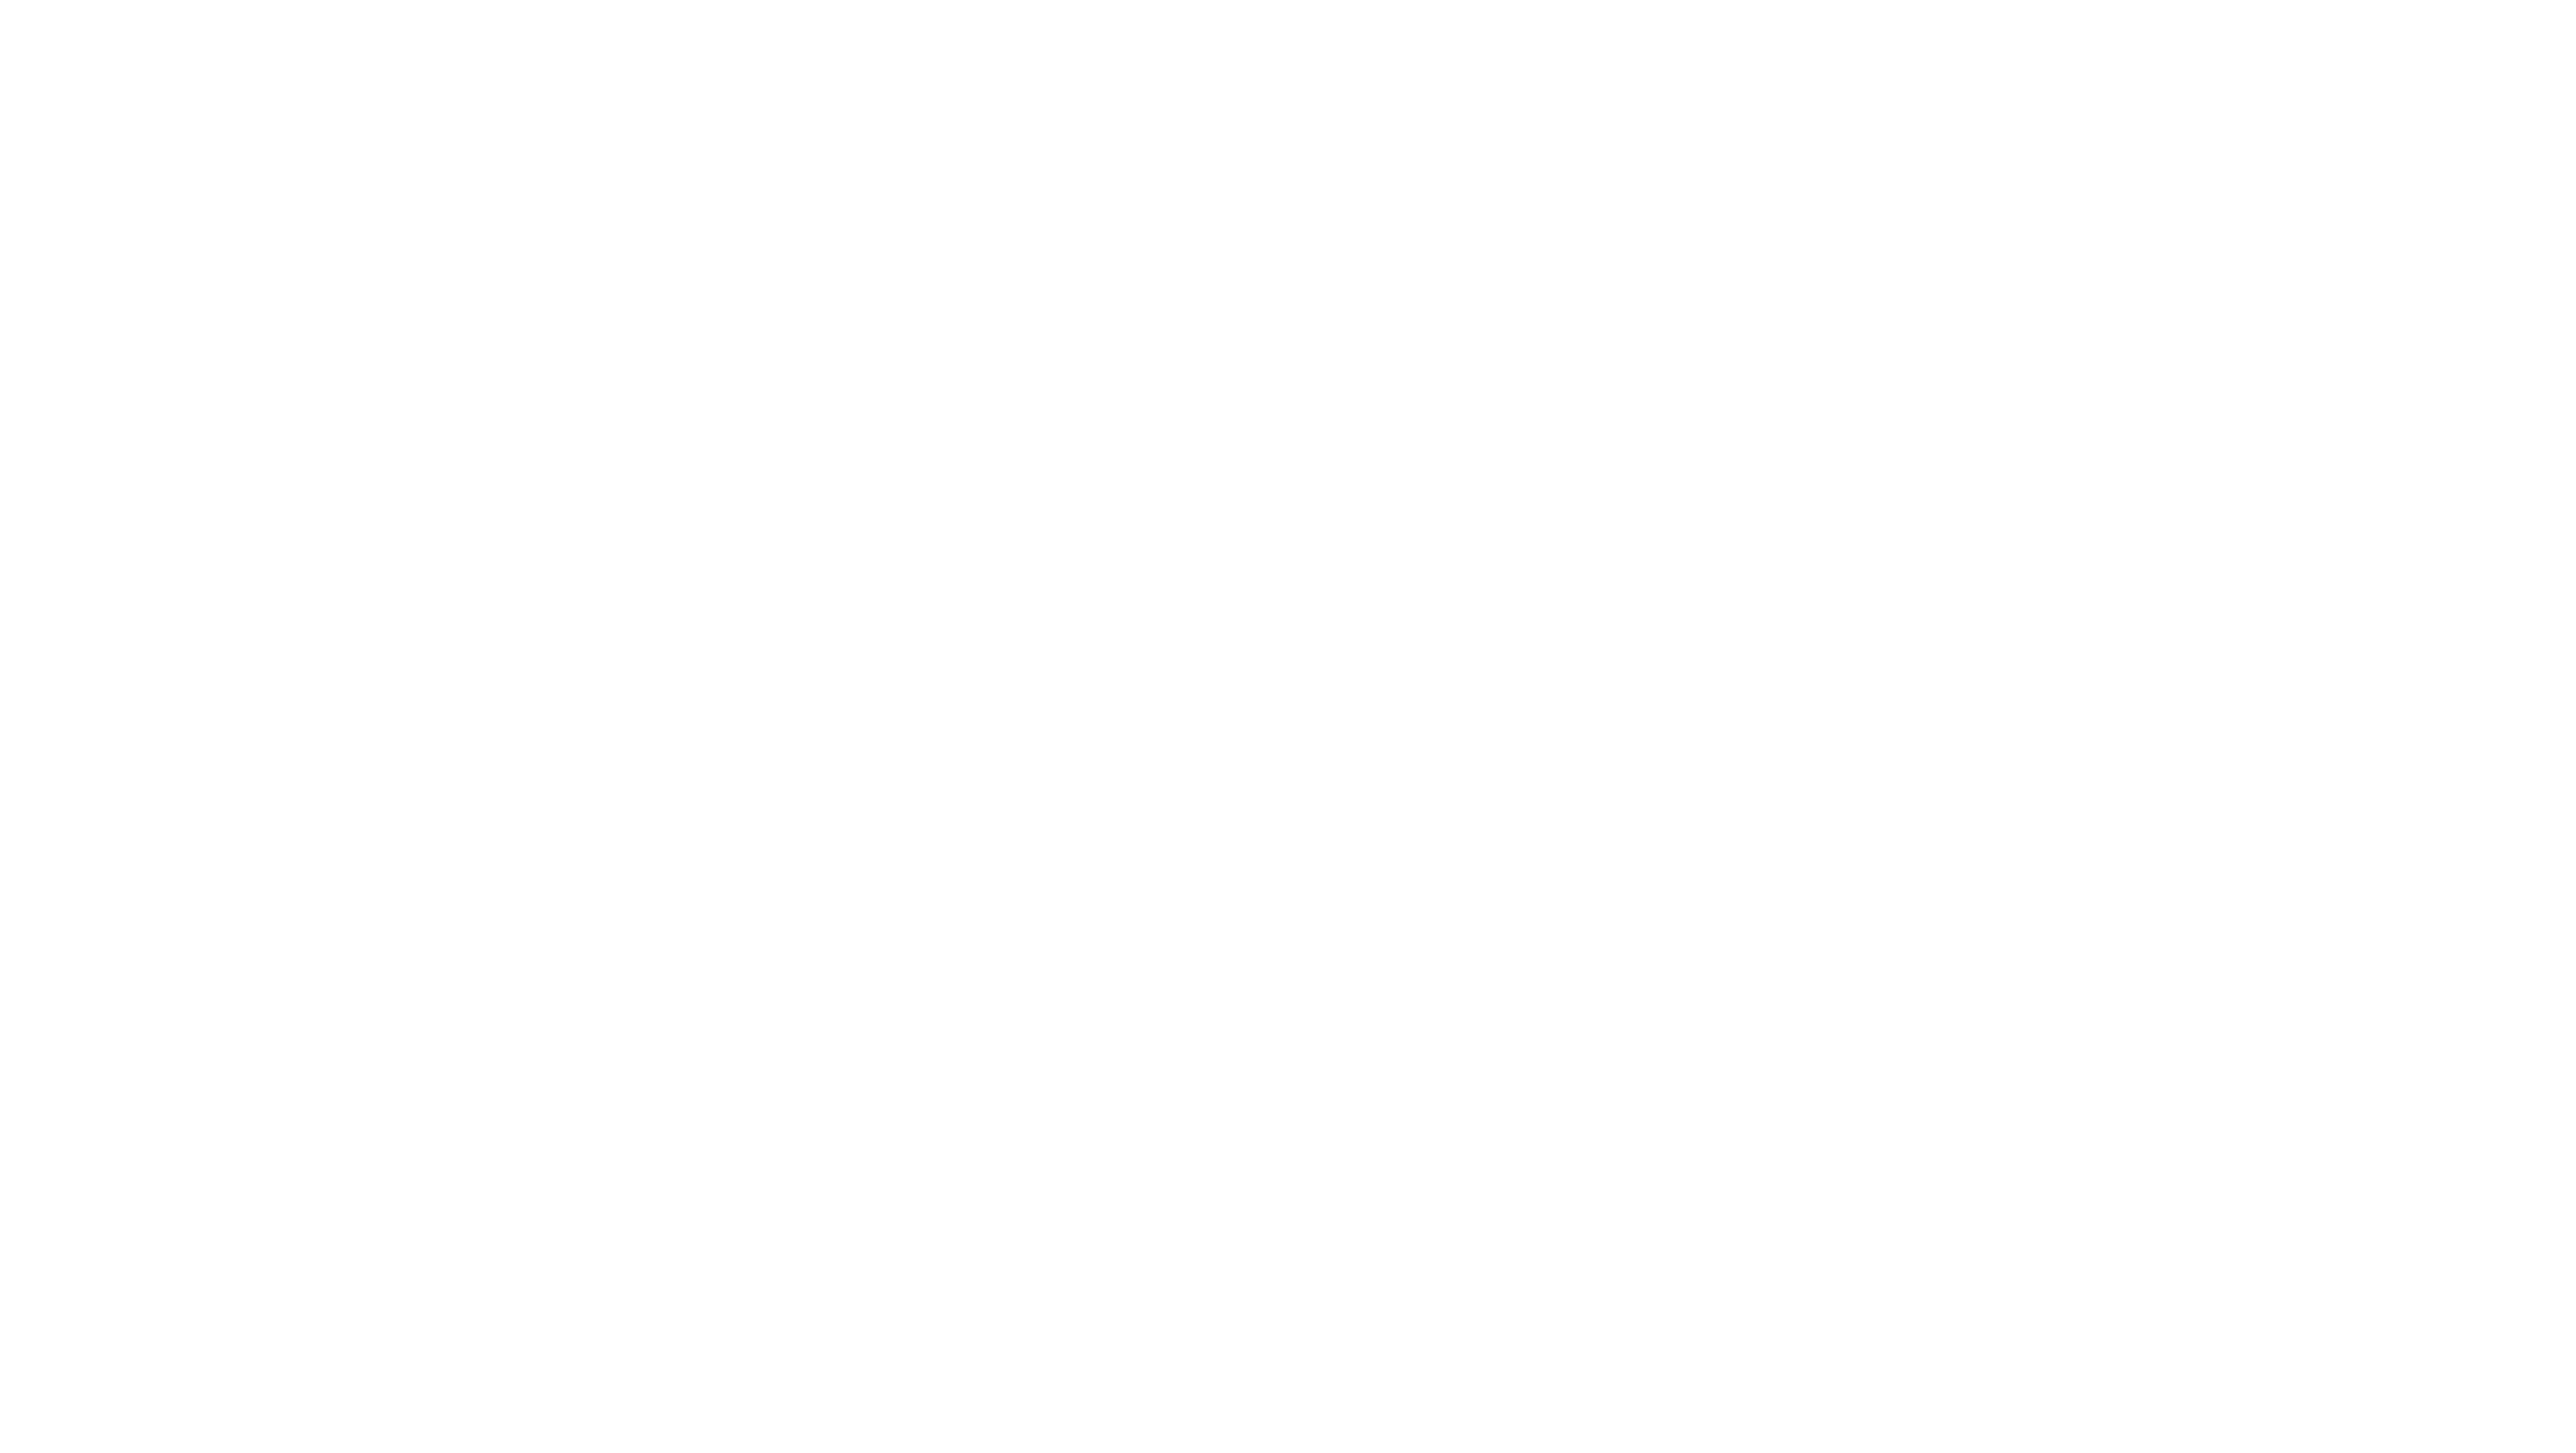 A black and white sign with white text stating resort Sardinia, potentially related to 12. 18. Inves